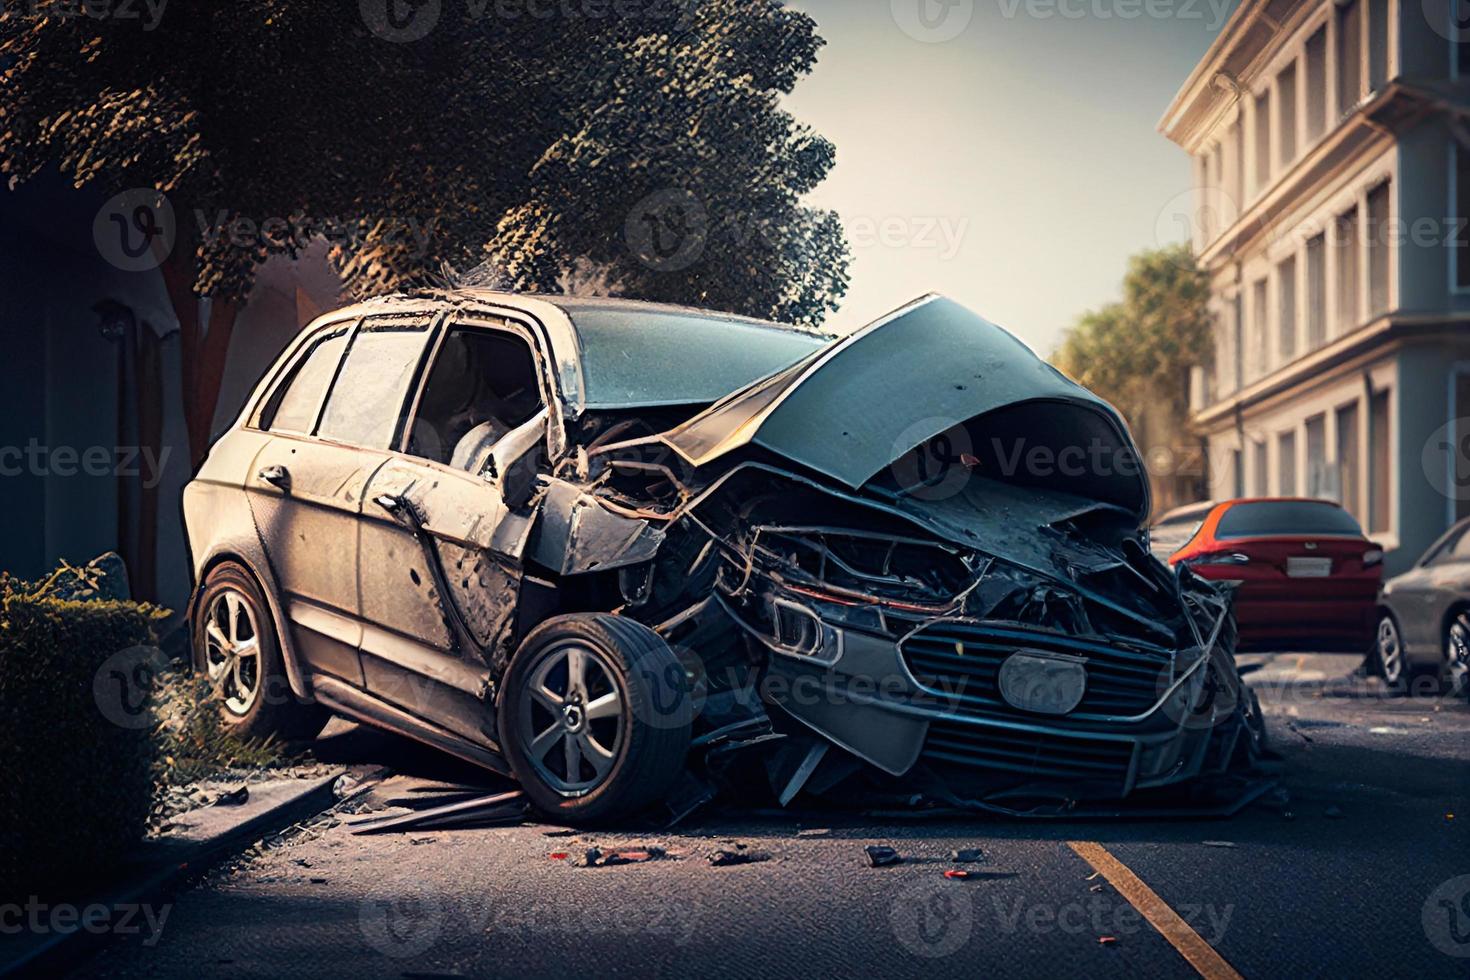 The insurance agent and the photographer investigate and photograph the broken white car AI photo